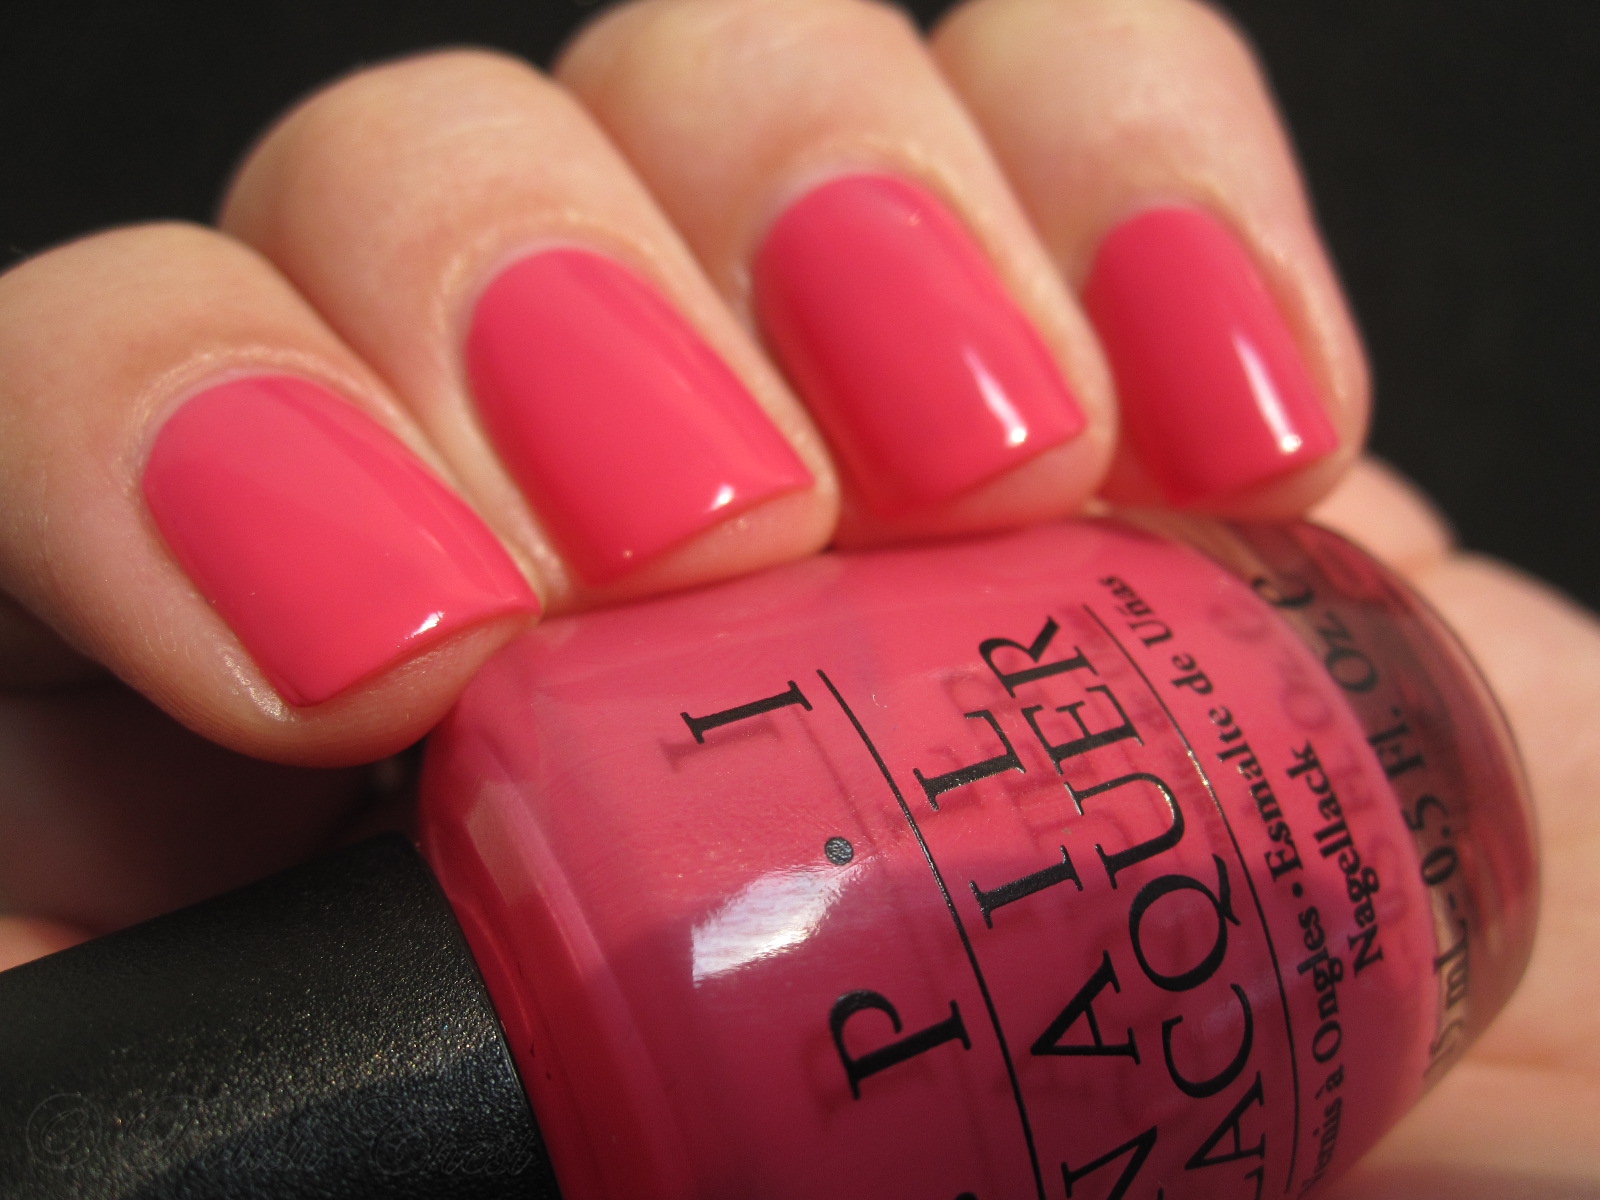 6. OPI Nail Lacquer in "Strawberry Margarita" - wide 3